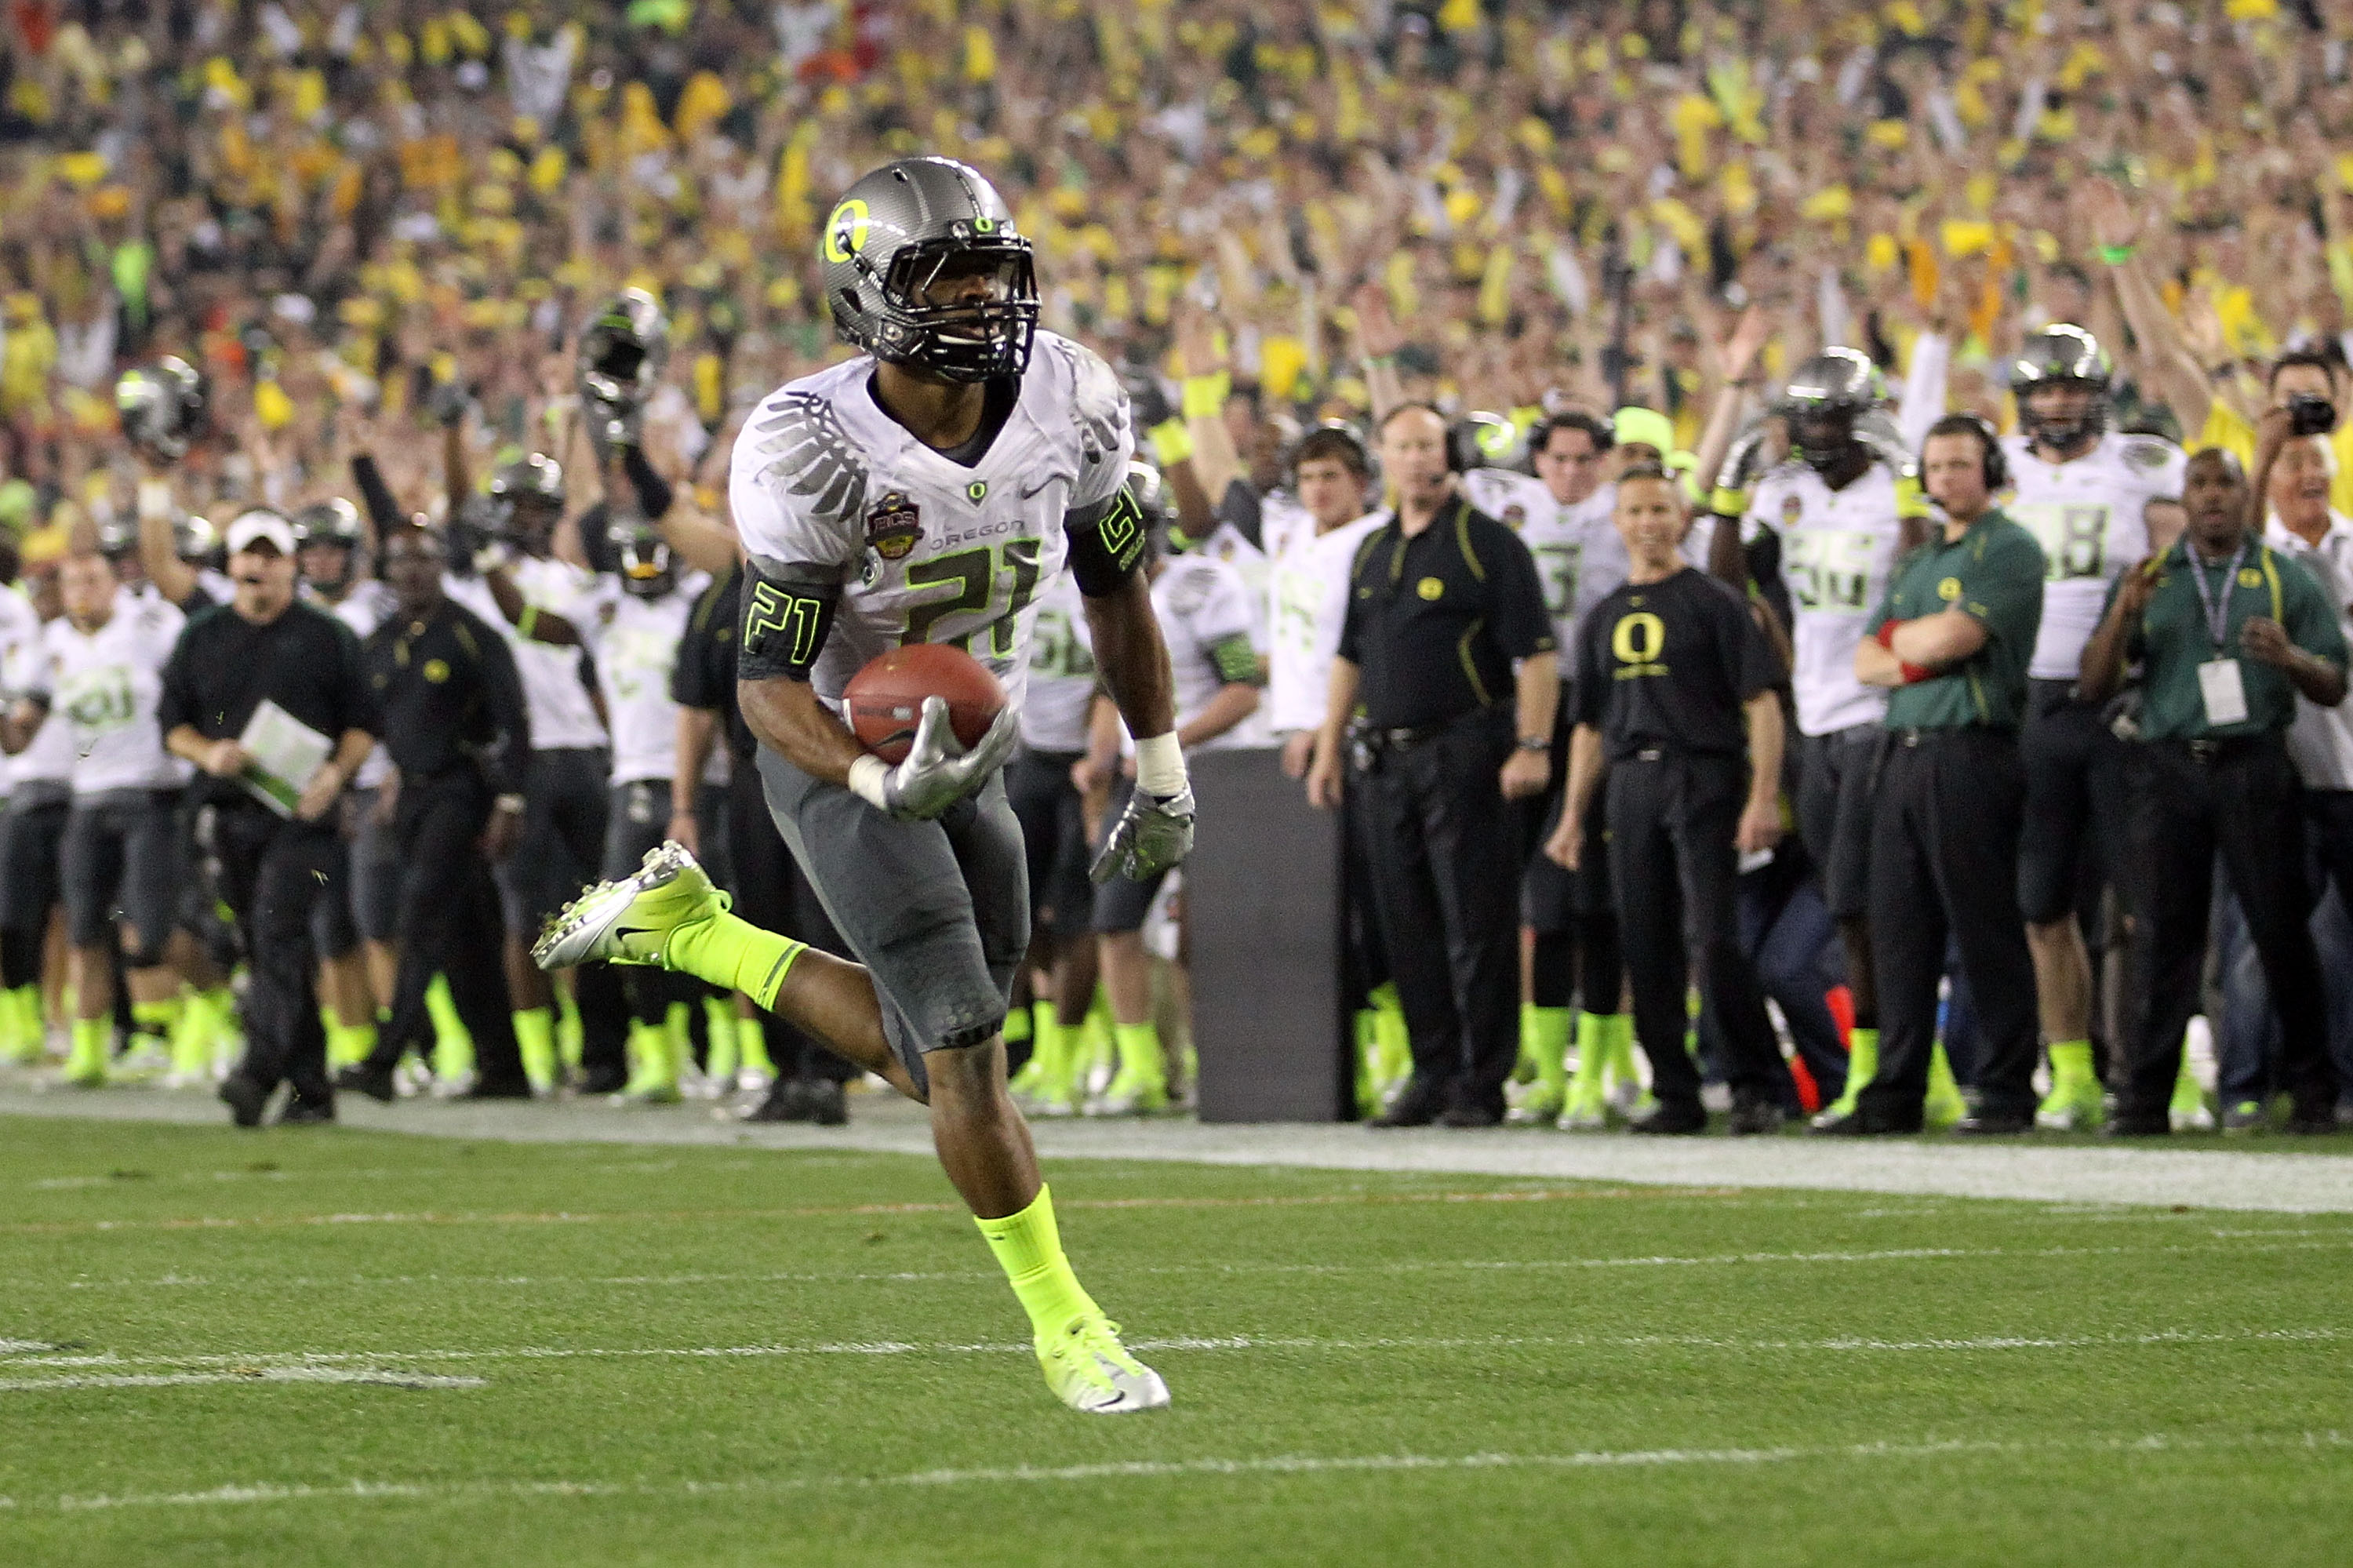 GLENDALE, AZ - JANUARY 10:  LaMichael James #21 of the Oregon Ducks scores on a eight-yard touchdown reception in the second quarter against the Auburn Tigers during the Tostitos BCS National Championship Game at University of Phoenix Stadium on January 1